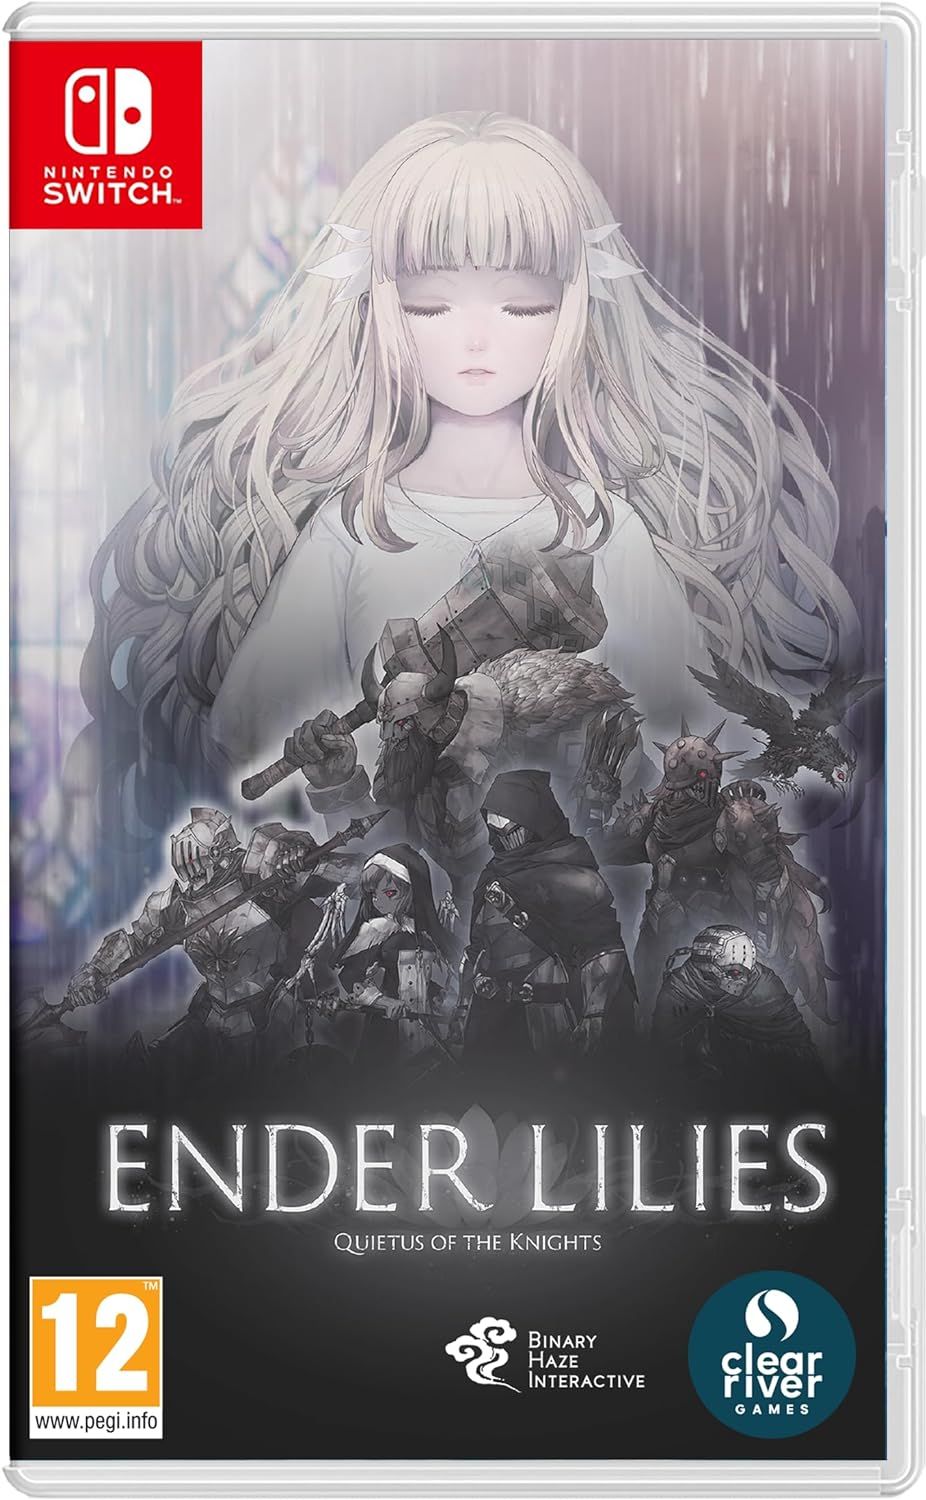 ender-lilies-quietus-of-the-knights-nintendo-switch-30.jpg